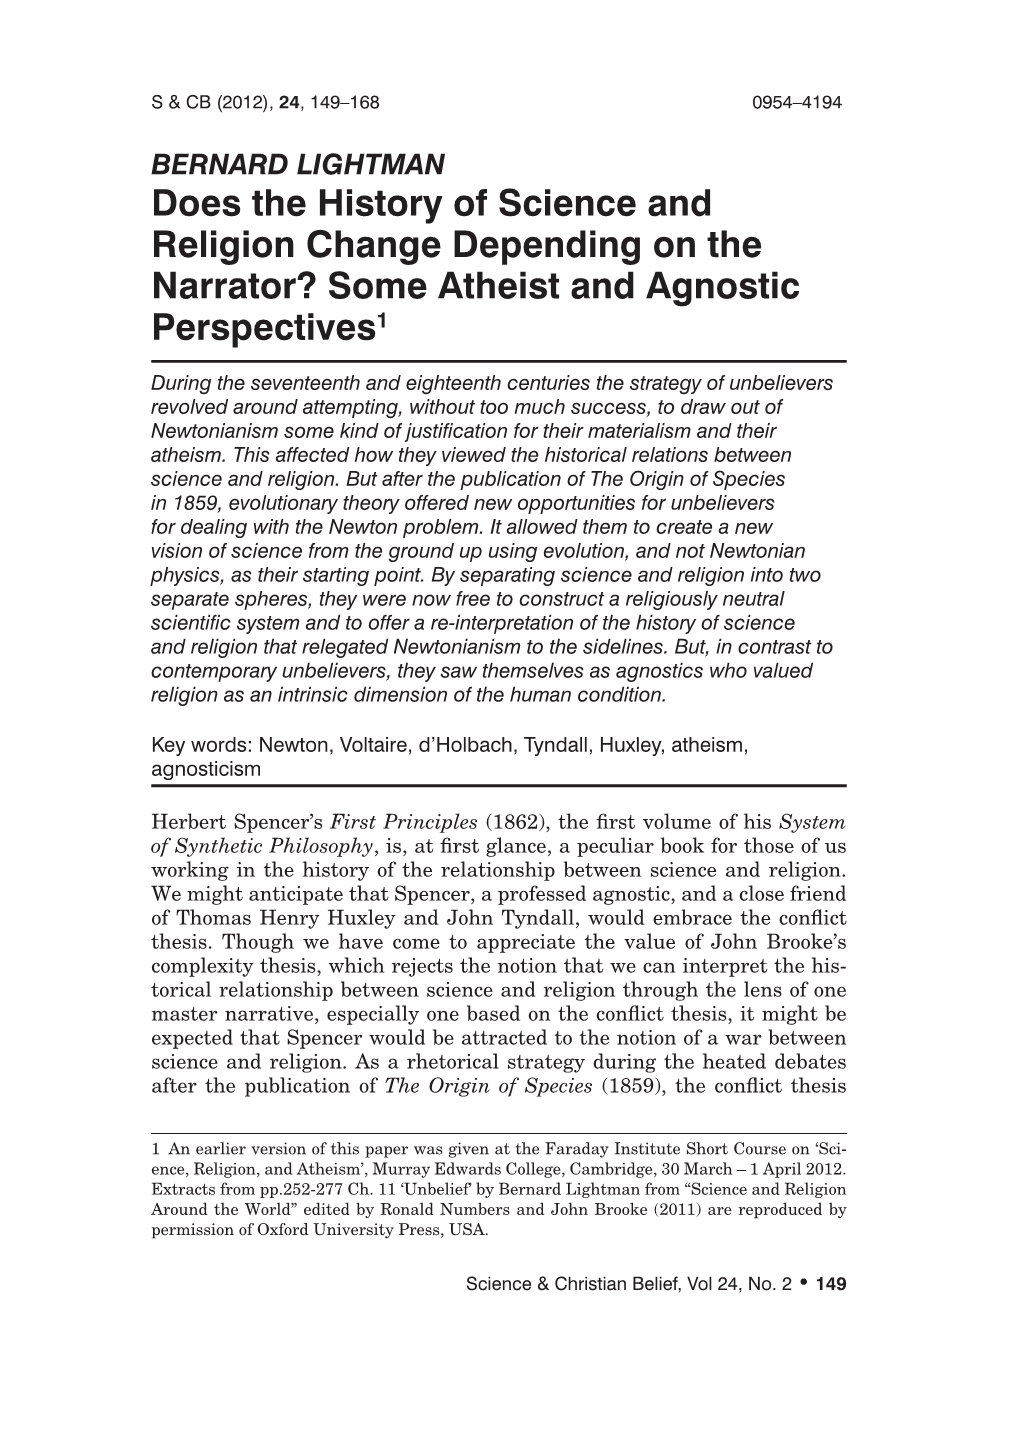 Does the History of Science and Religion Change Depending on the Narrator? Some Atheist and Agnostic Perspectives1